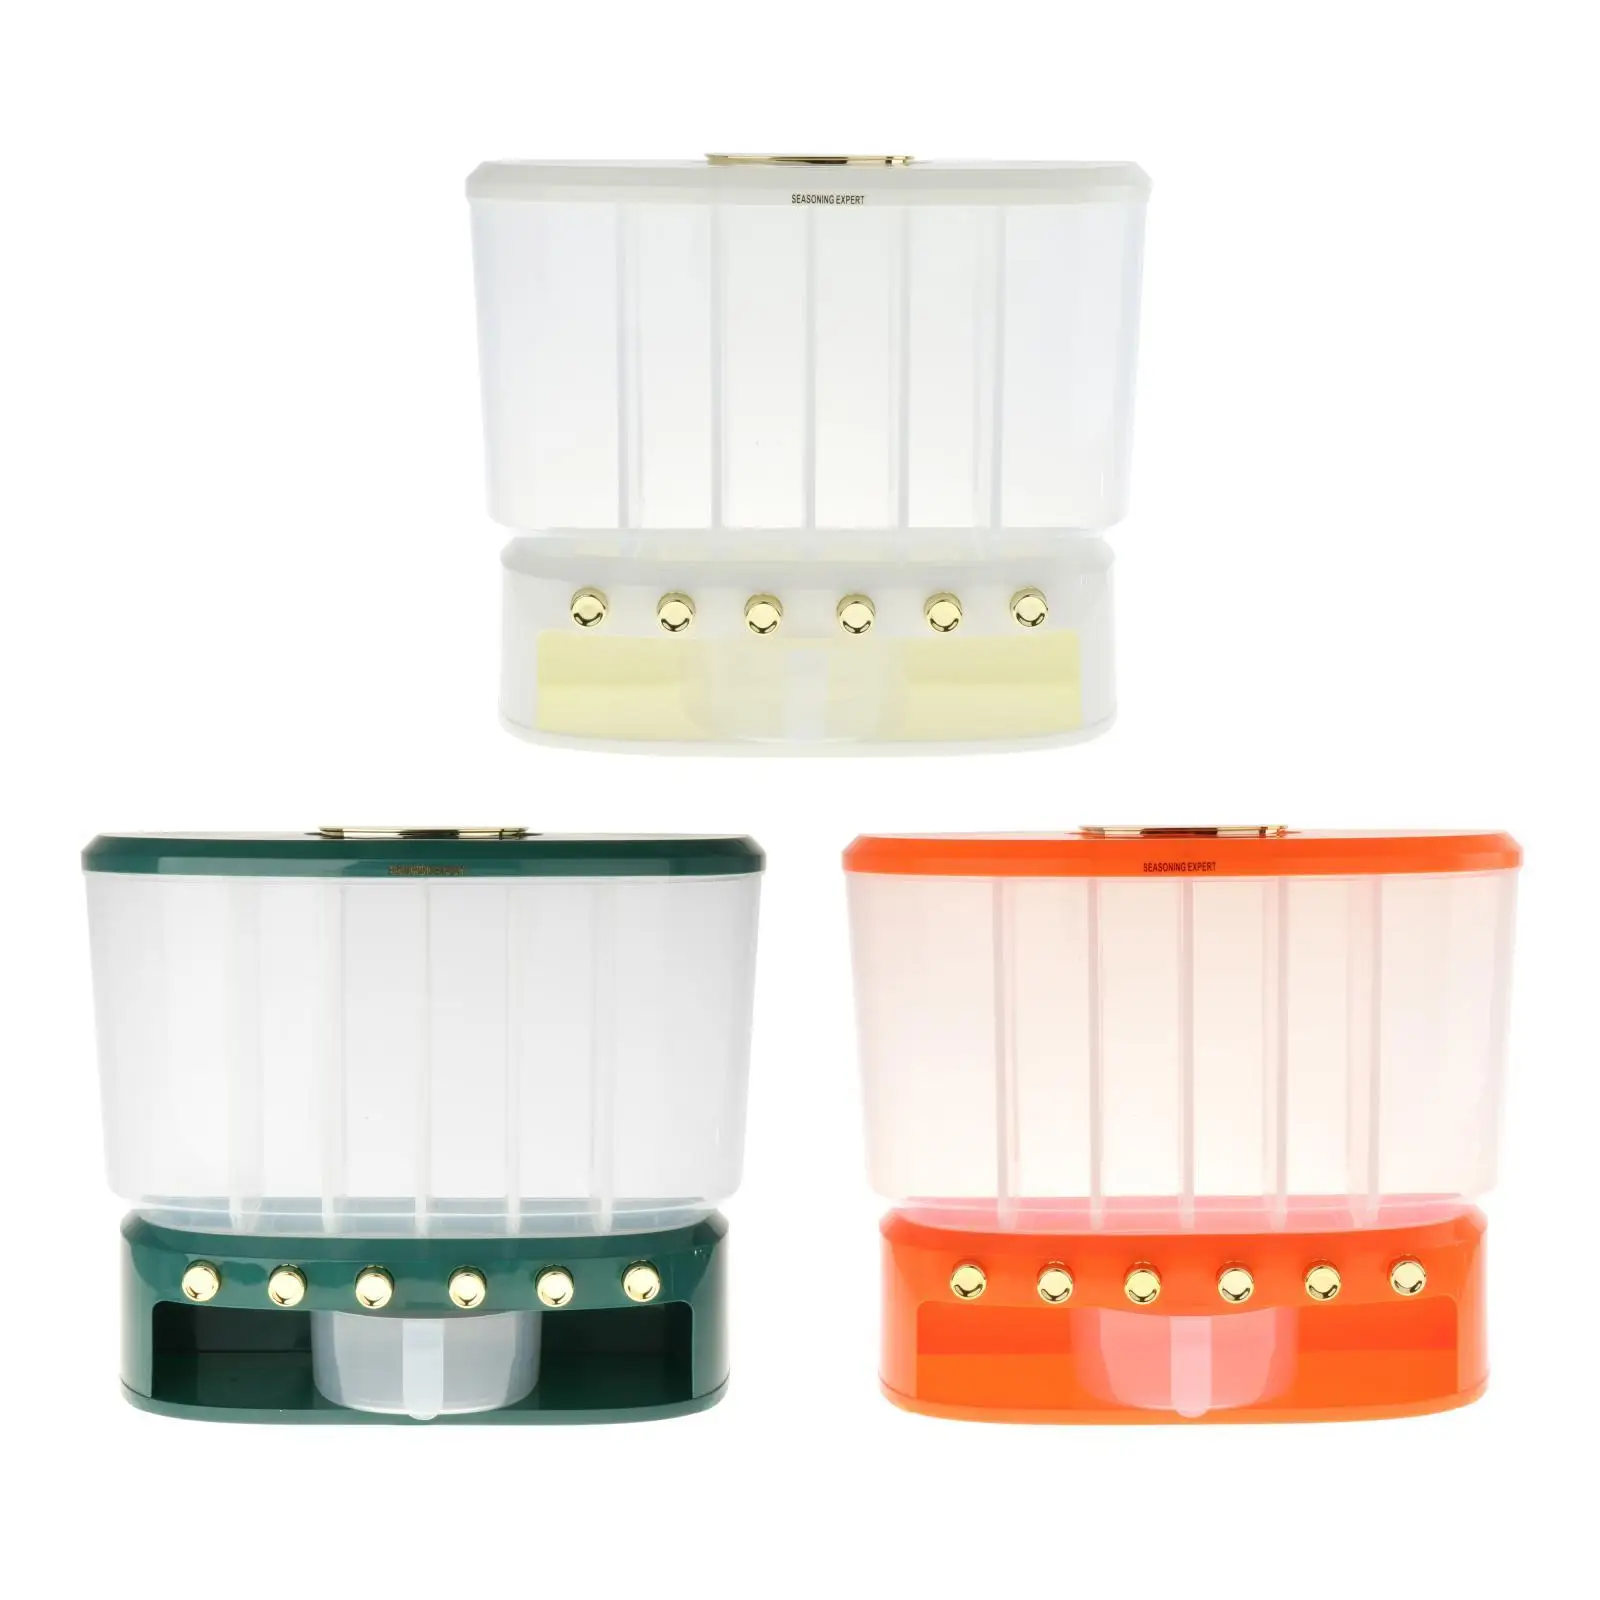 Rice Separate Bucket 6 Grids with Lids Airtight Food Storage for Restaurant